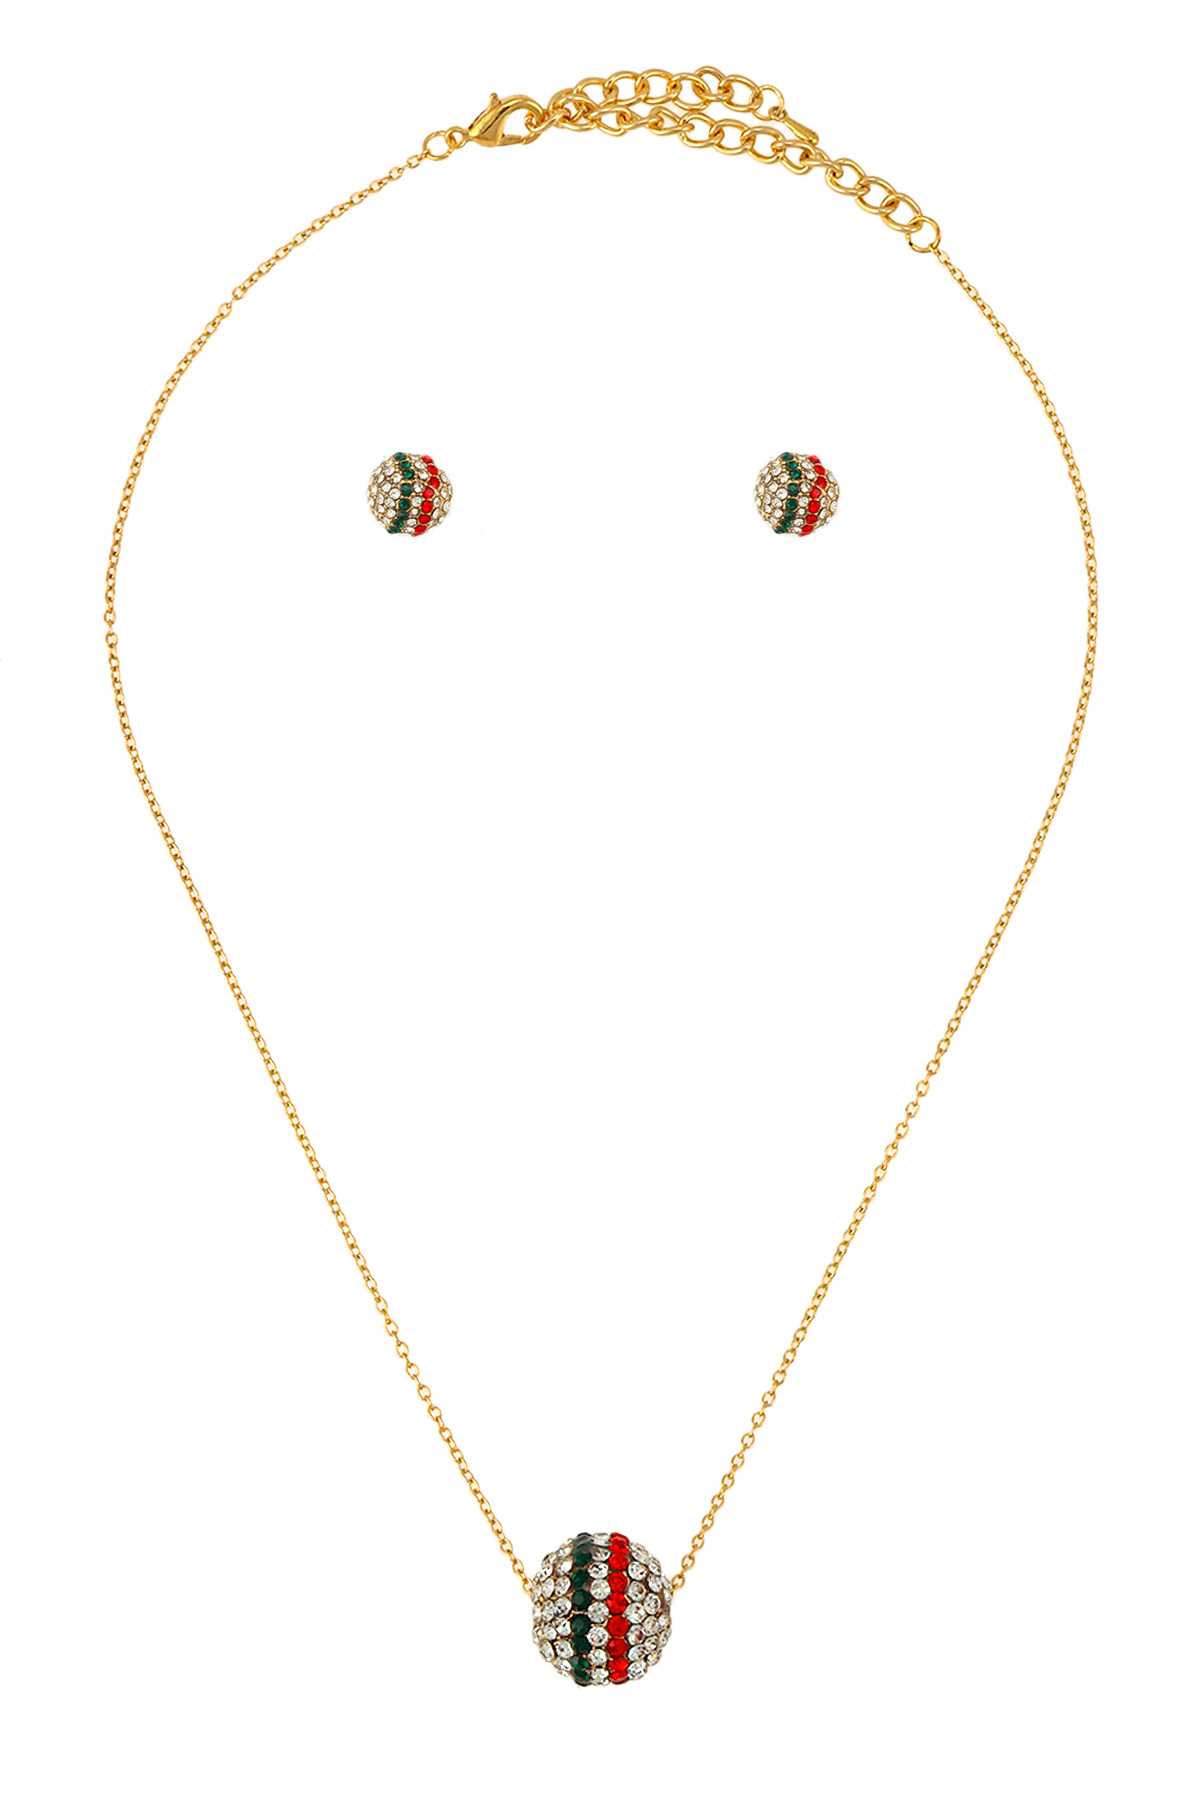 Rhinestone Circle Two Color Line Necklace Set